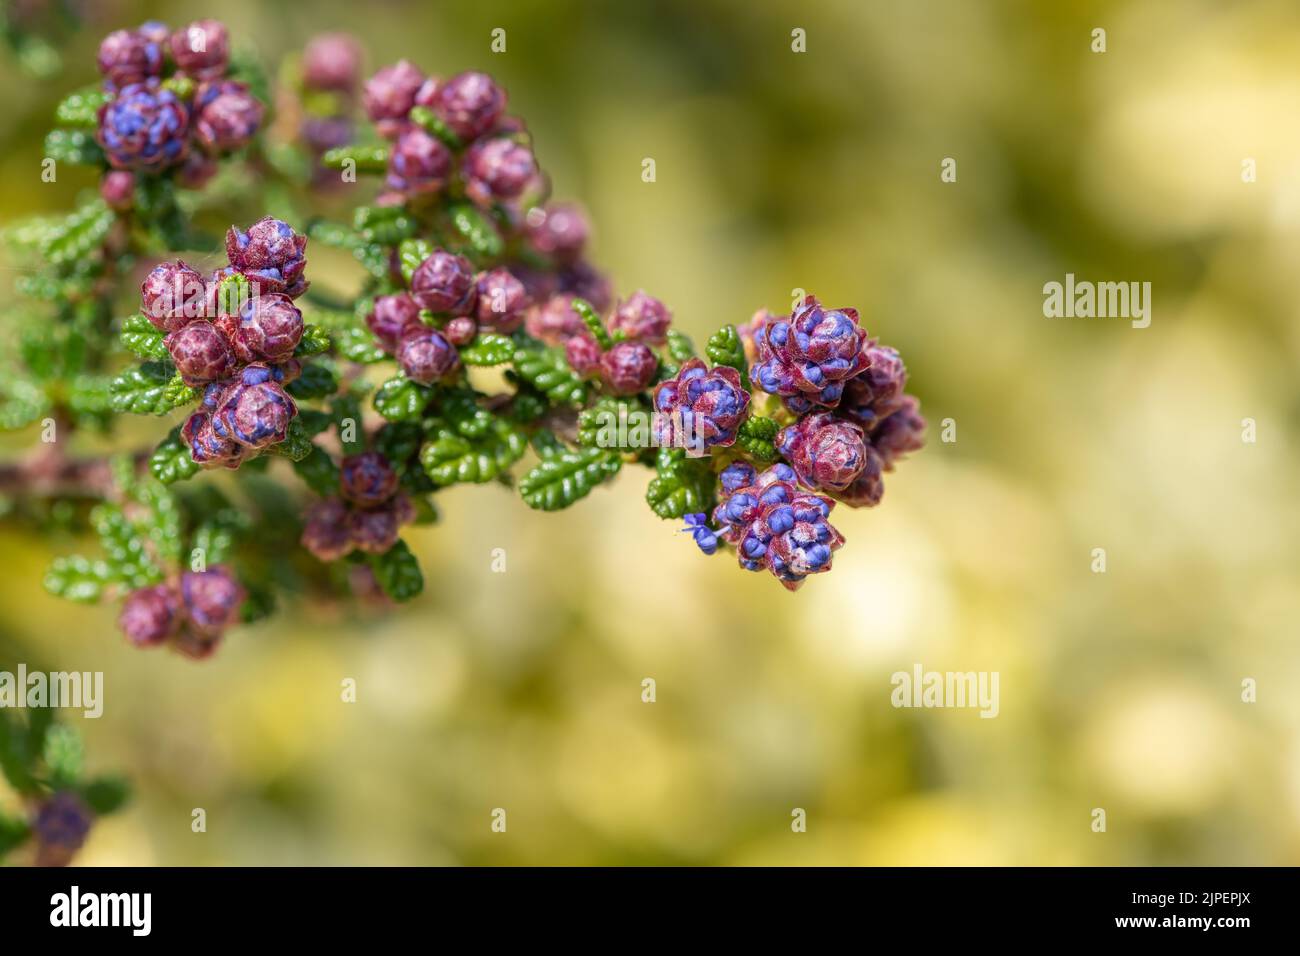 Close up of buds on a California lilac (ceanothus) bush Stock Photo